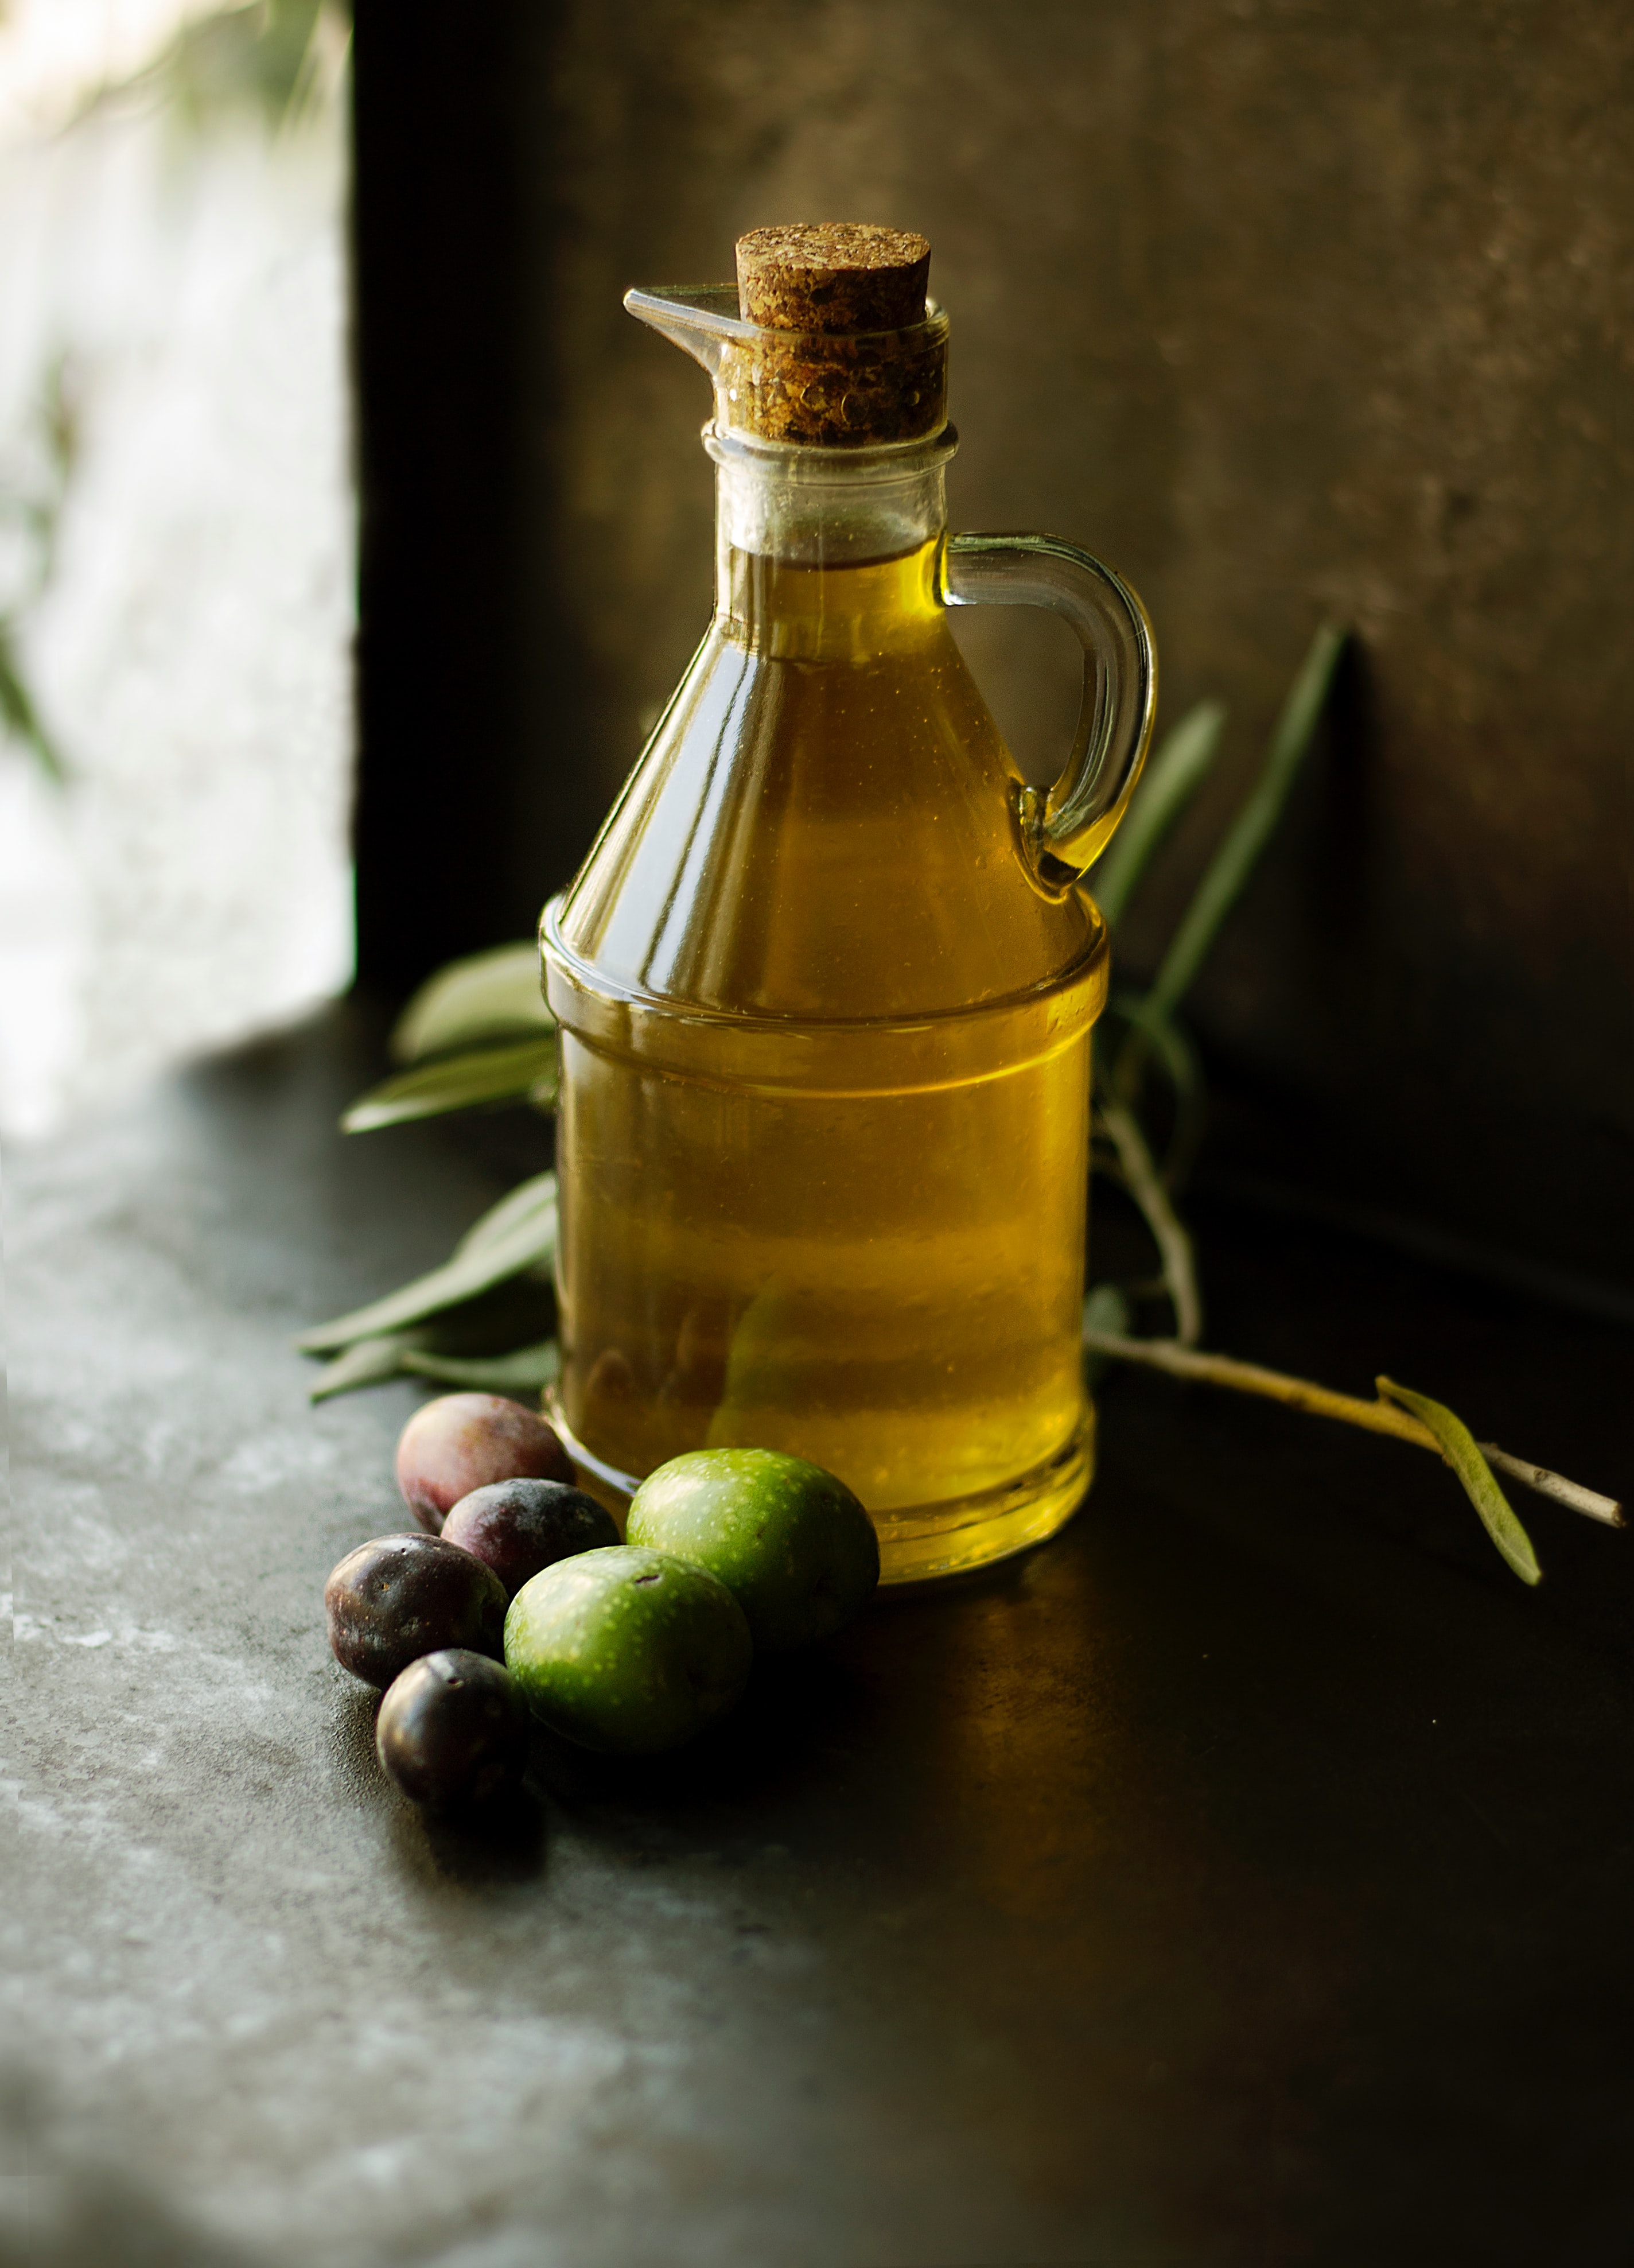 Marwan Kheireddine Discusses Why Olive Oil Could Be Lebanon’s Best Untapped Resource